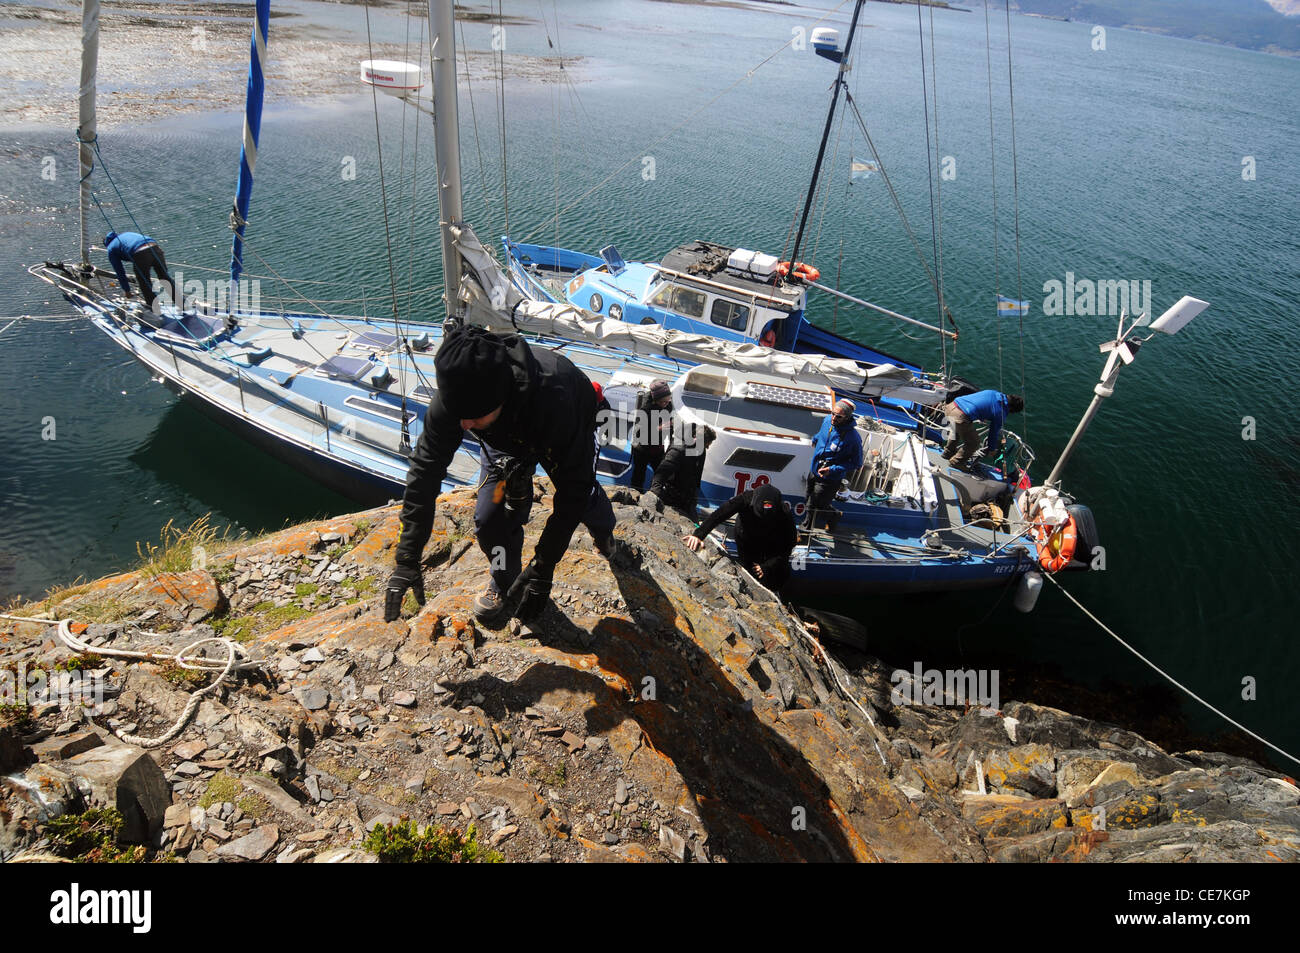 People climbing ashore from yacht onto H Island, Beagle Channel, near Ushuaia, Tierra del Fuego, Argentina. No PR or MR Stock Photo